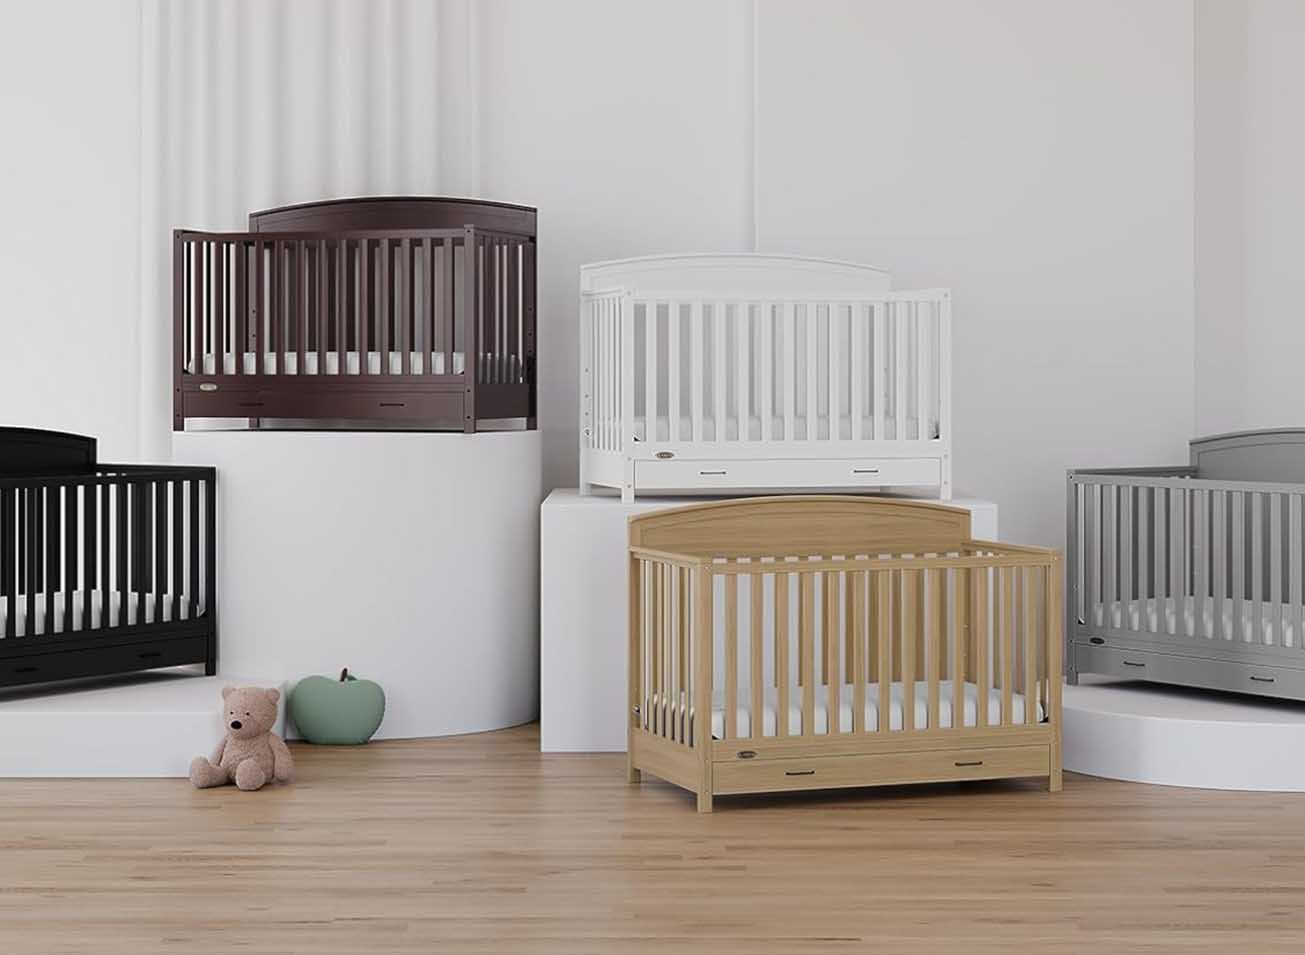 Whispers of the Cradle: Exploring the Artistry and Innovation of Baby Cribs